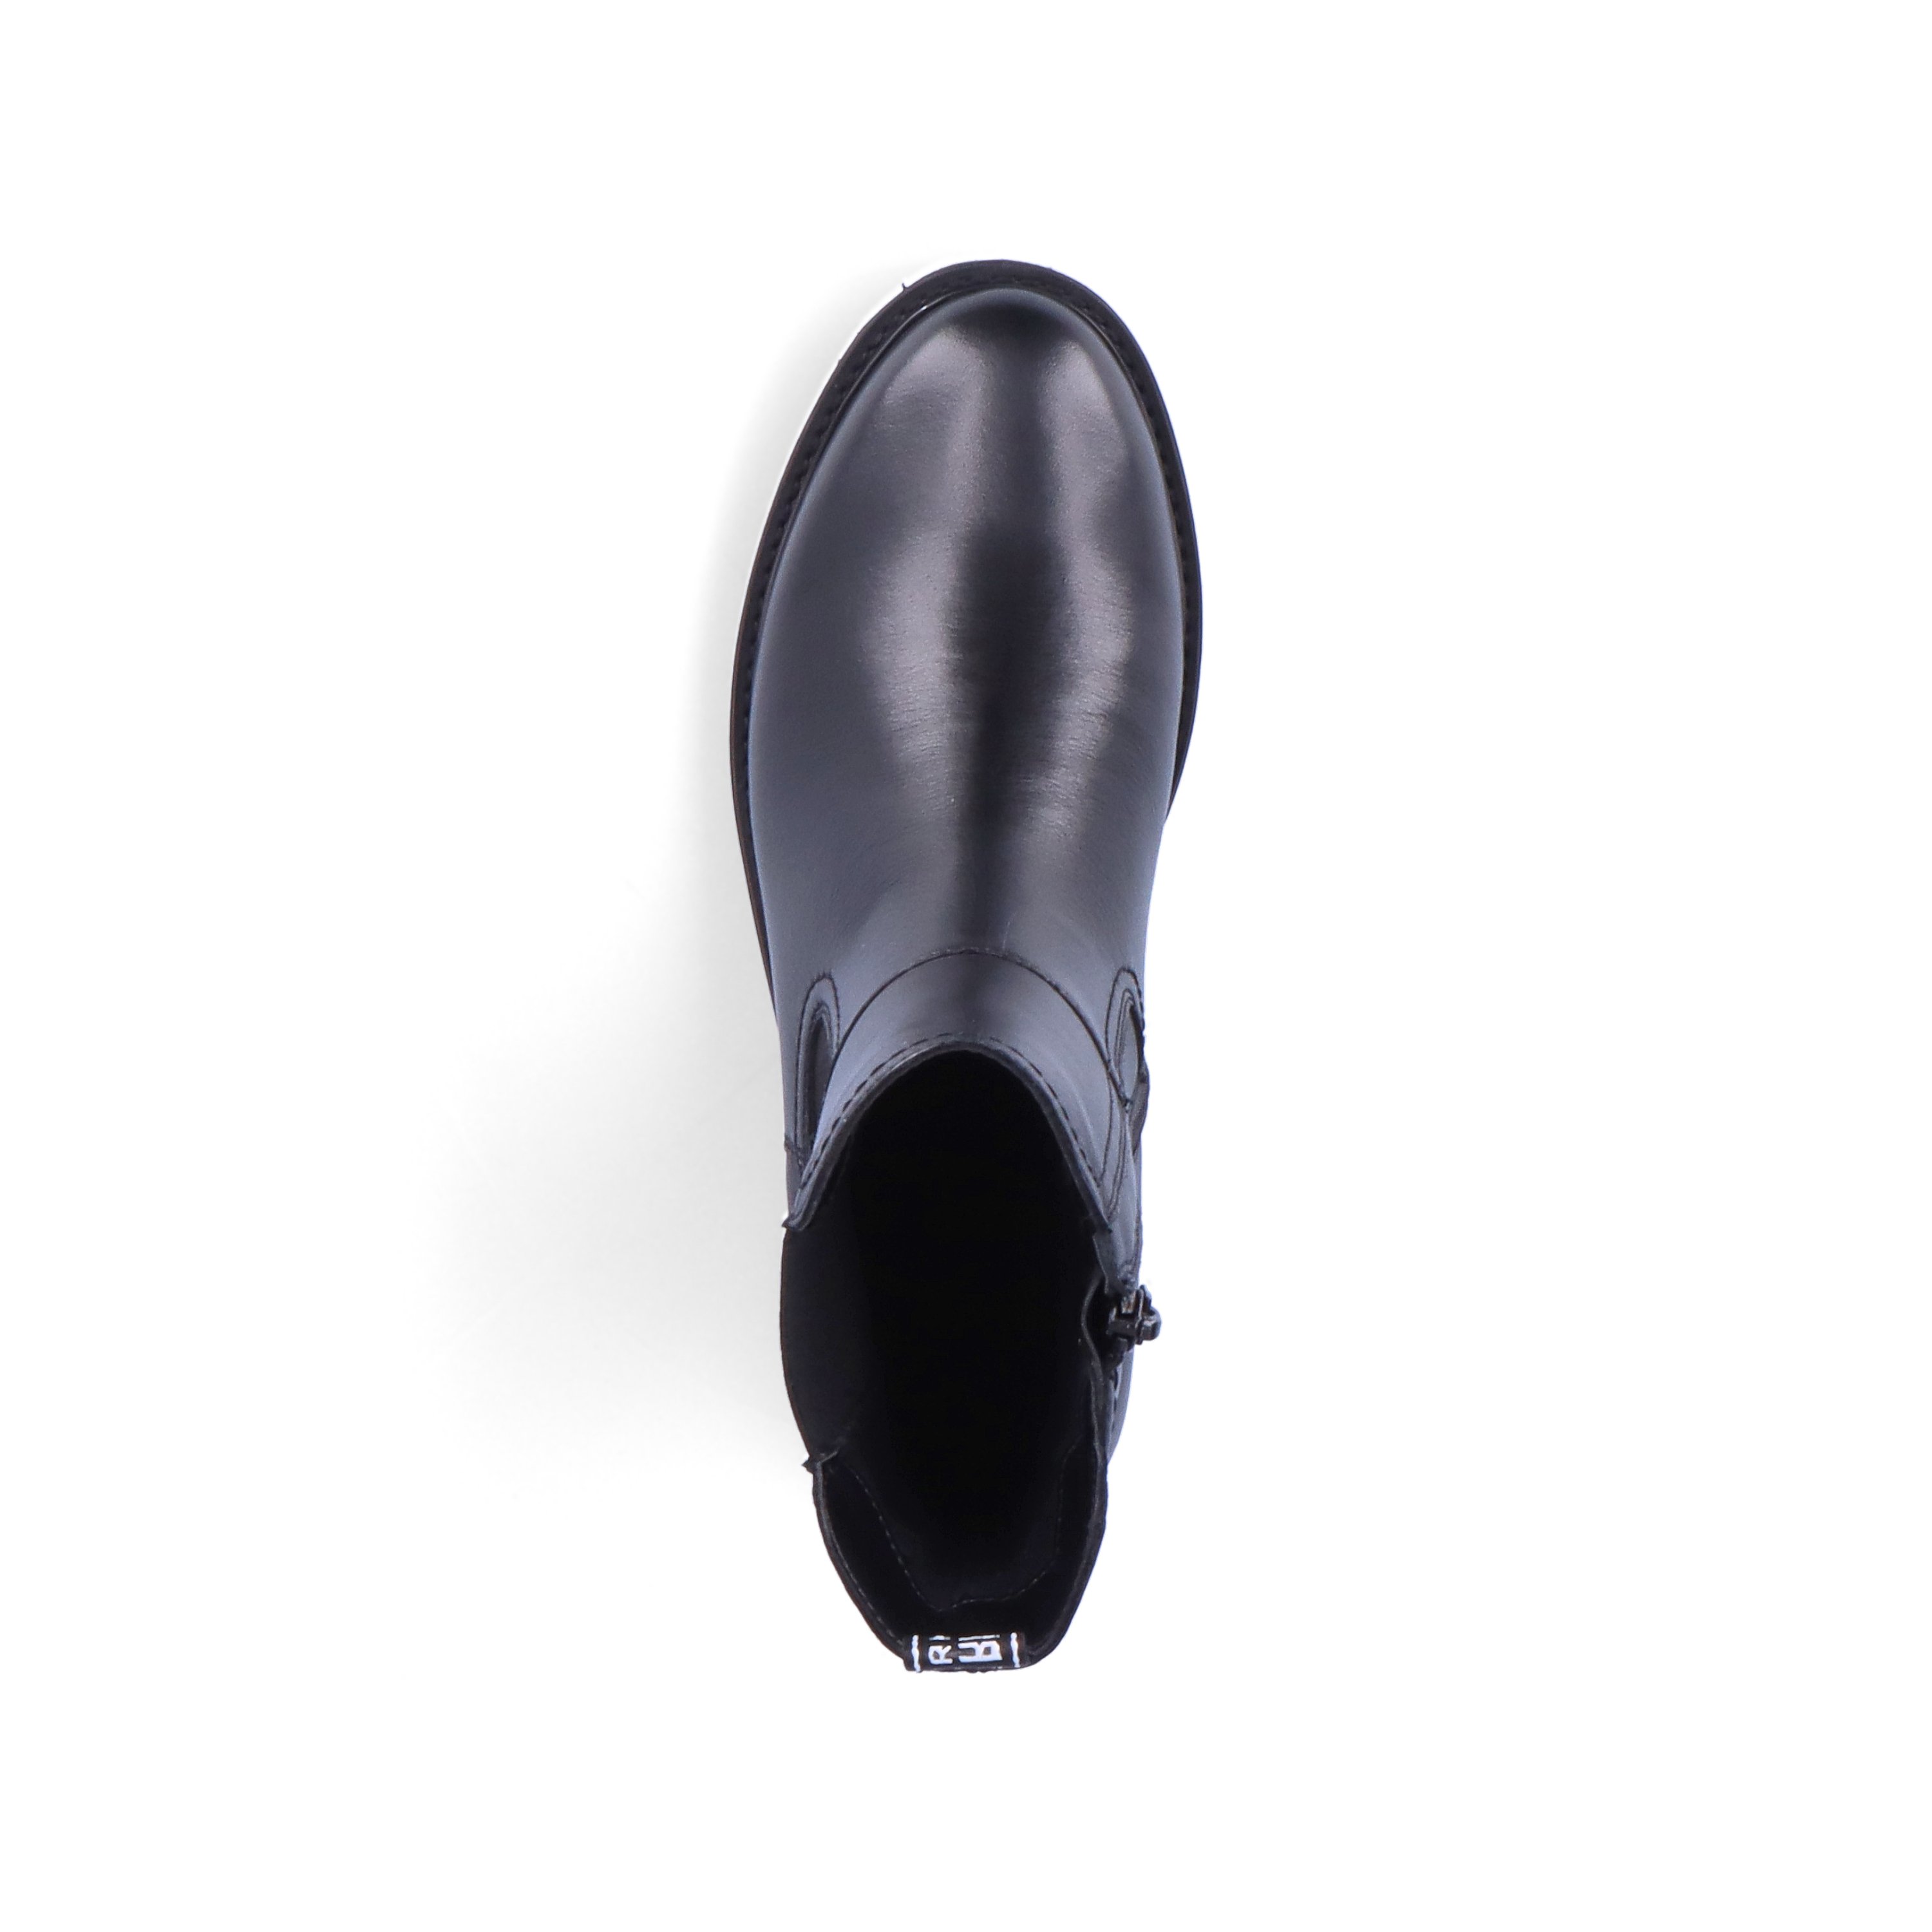 Graphite black remonte women´s Chelsea boots D8694-00 with cushioning sole. Shoe from the top